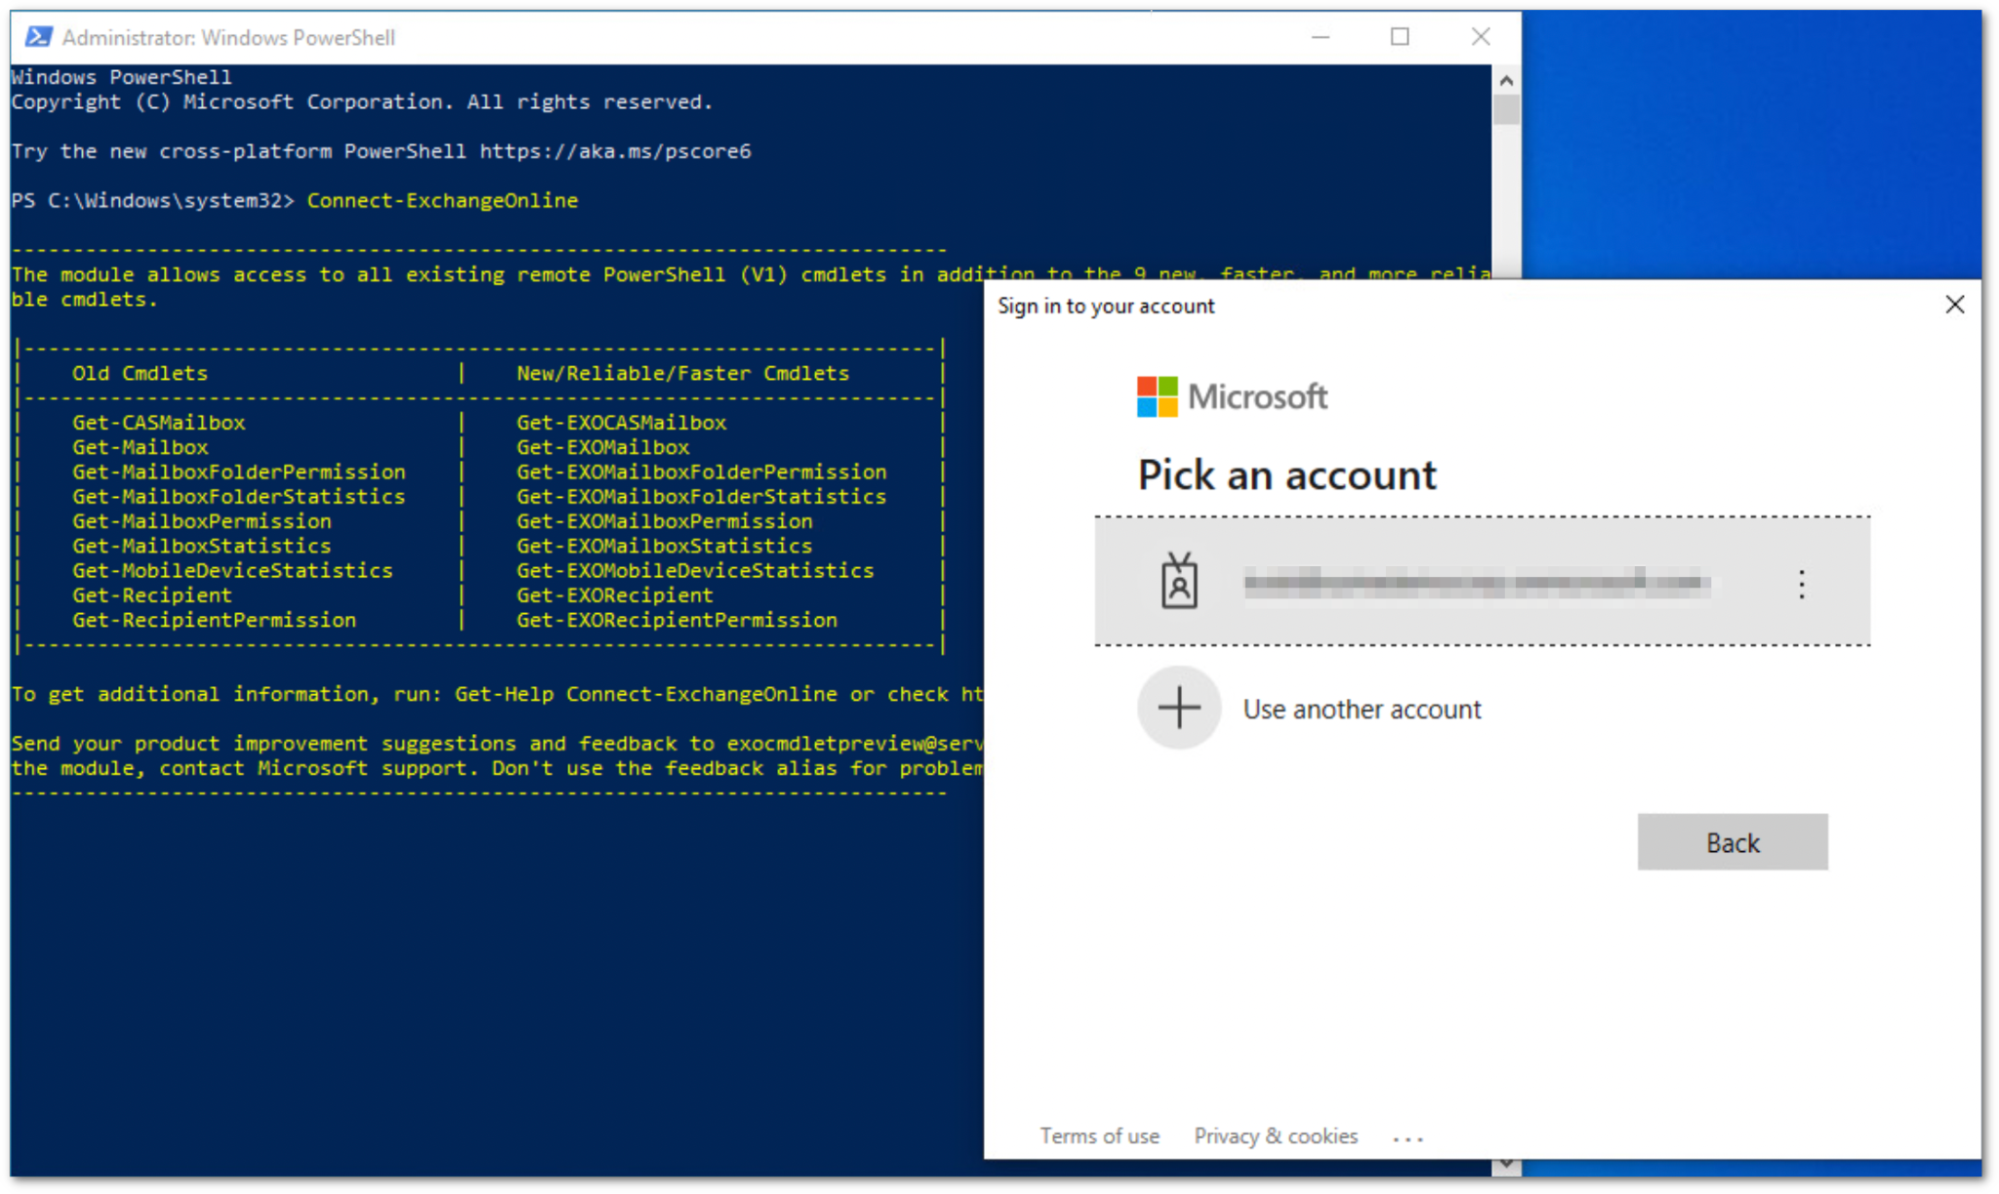 Log in with an Office 365 admin account